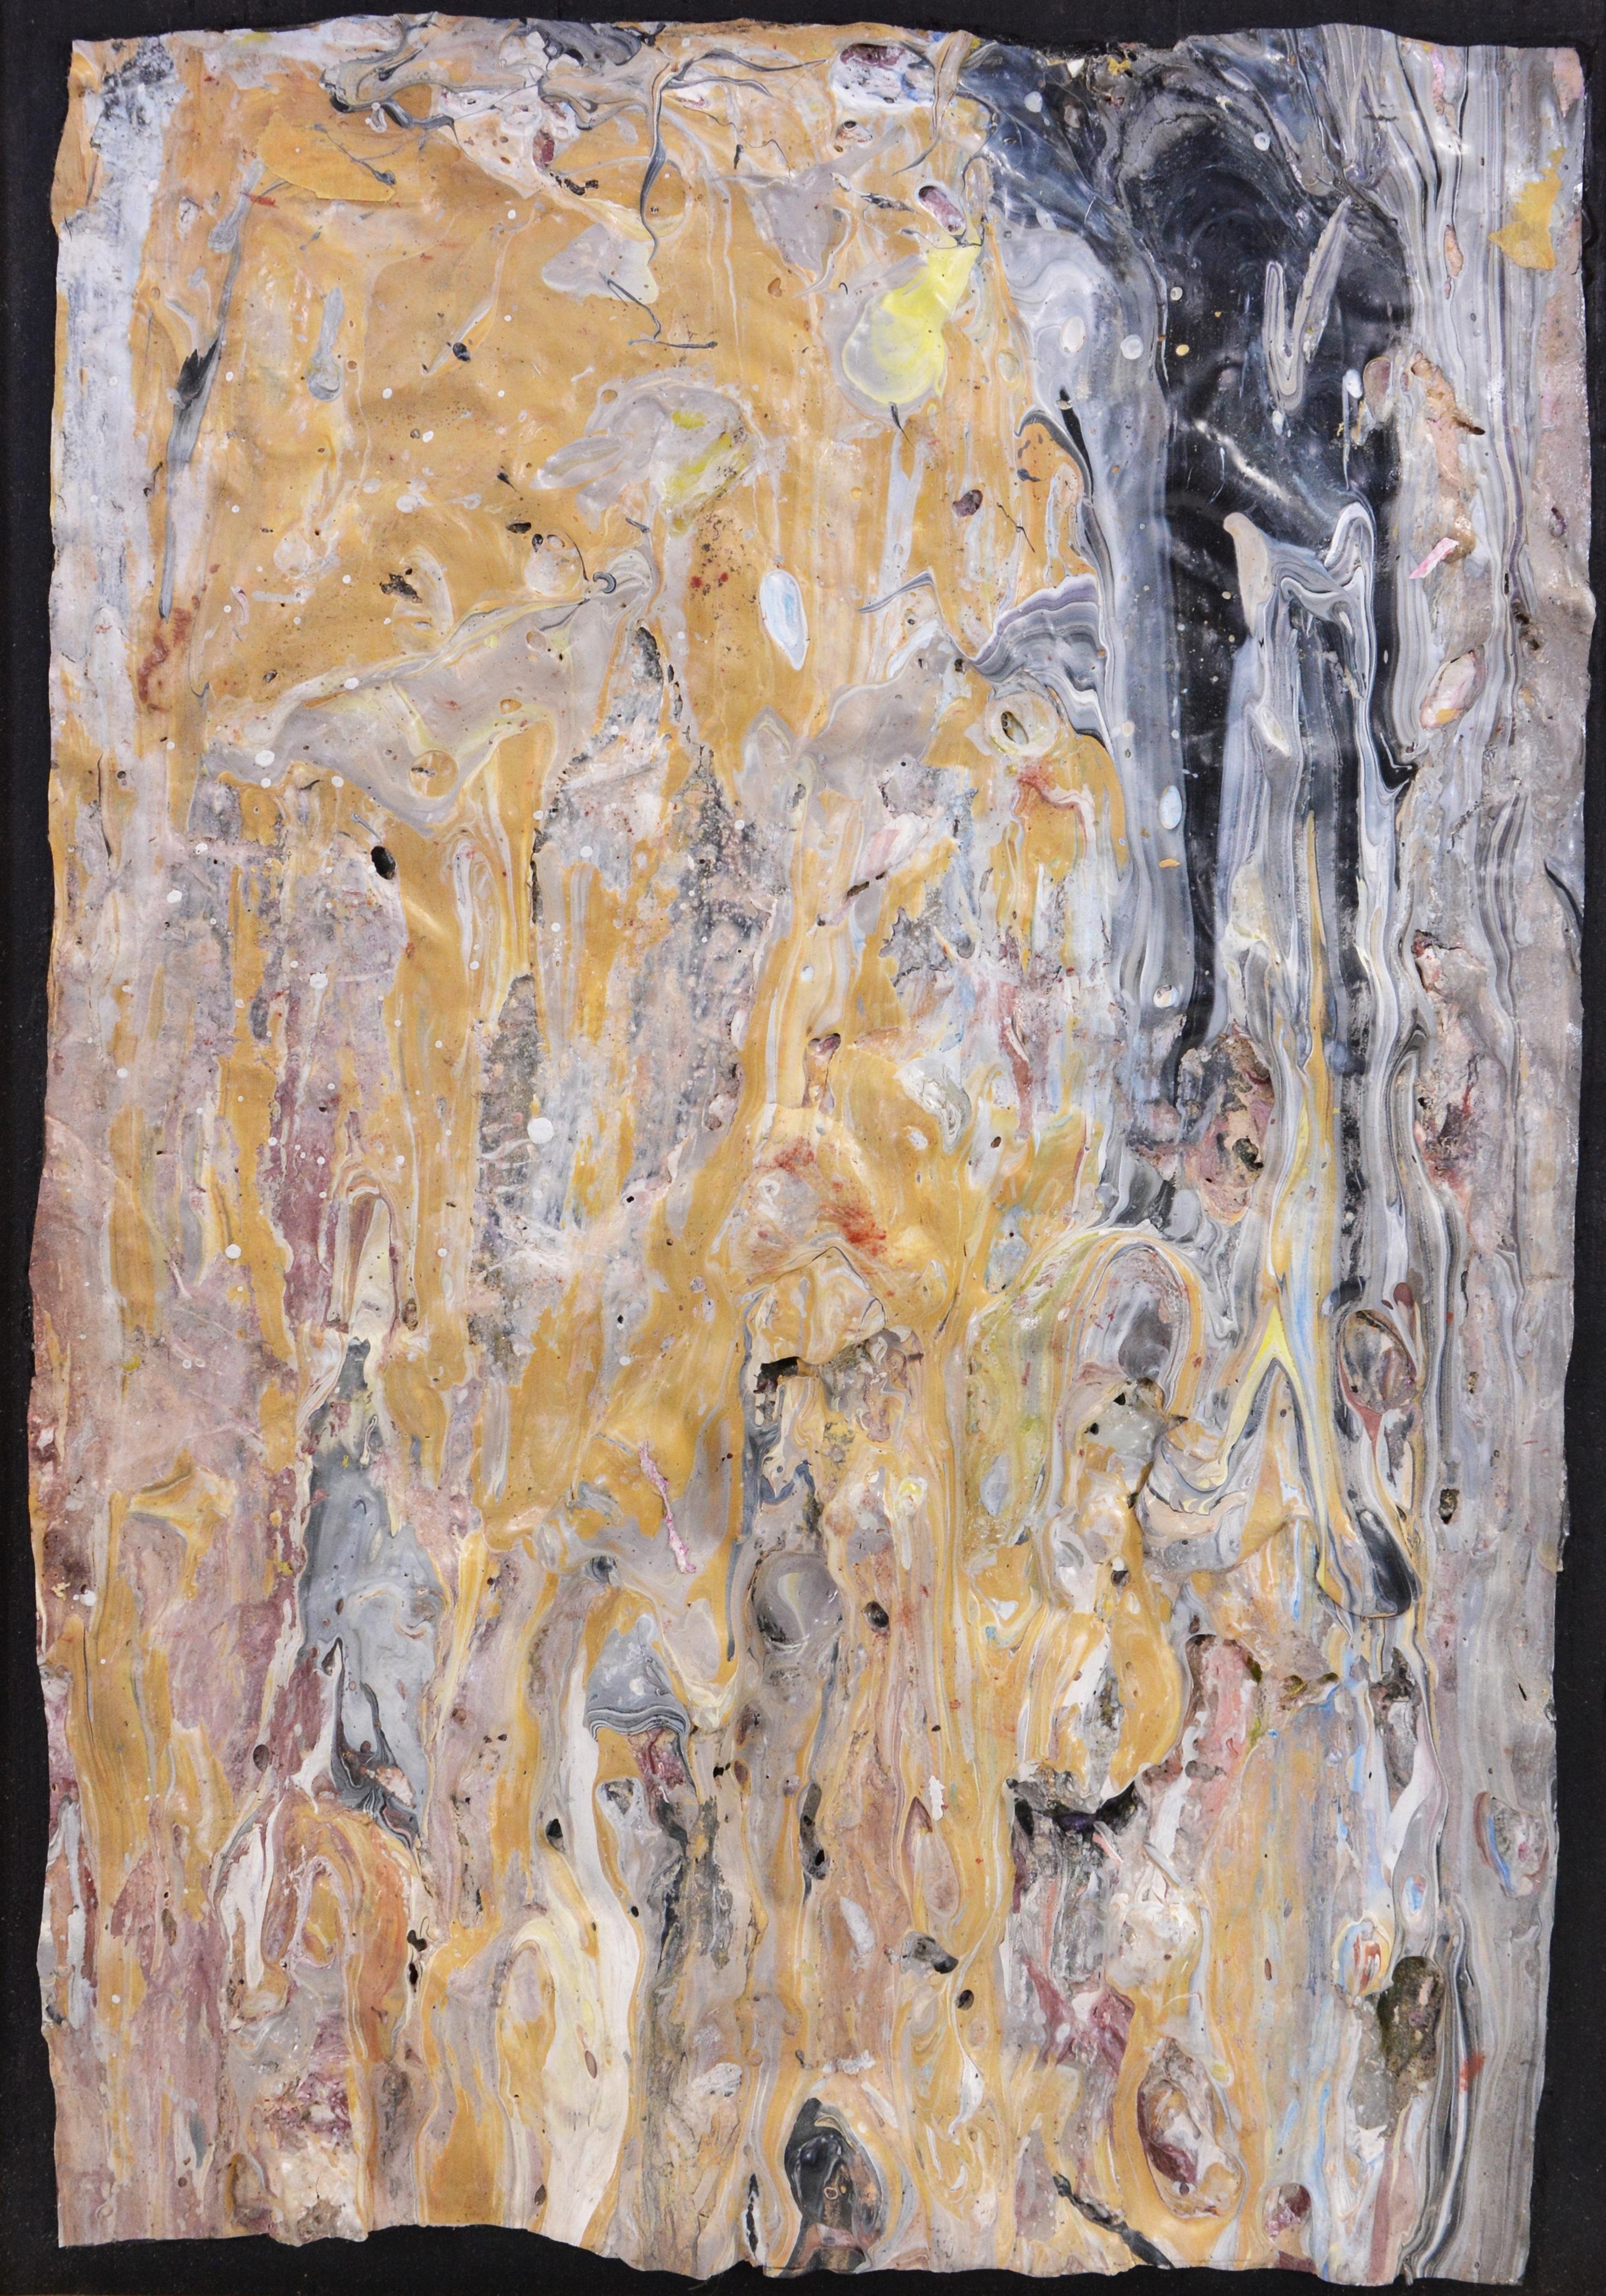 84BS-2 - Painting by Larry Poons